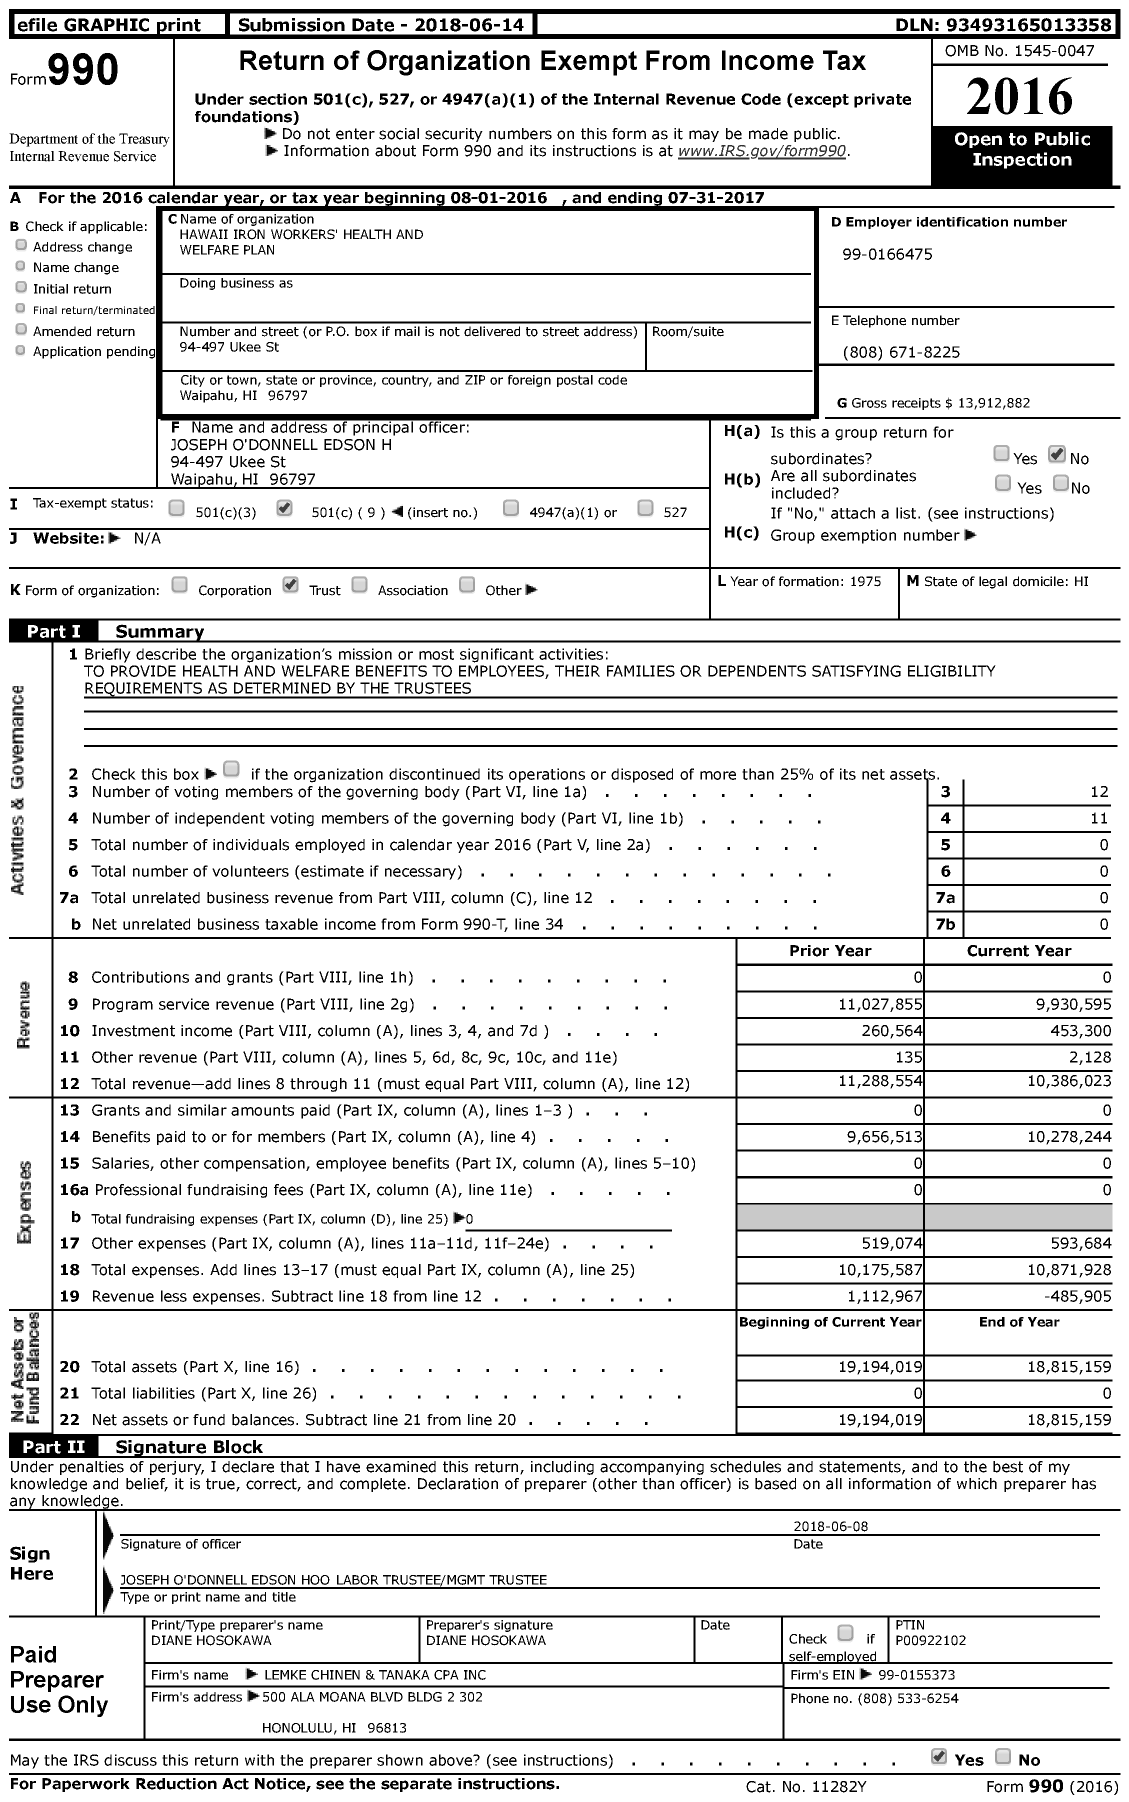 Image of first page of 2016 Form 990 for Hawaii Iron Workers' Health and Welfare Plan